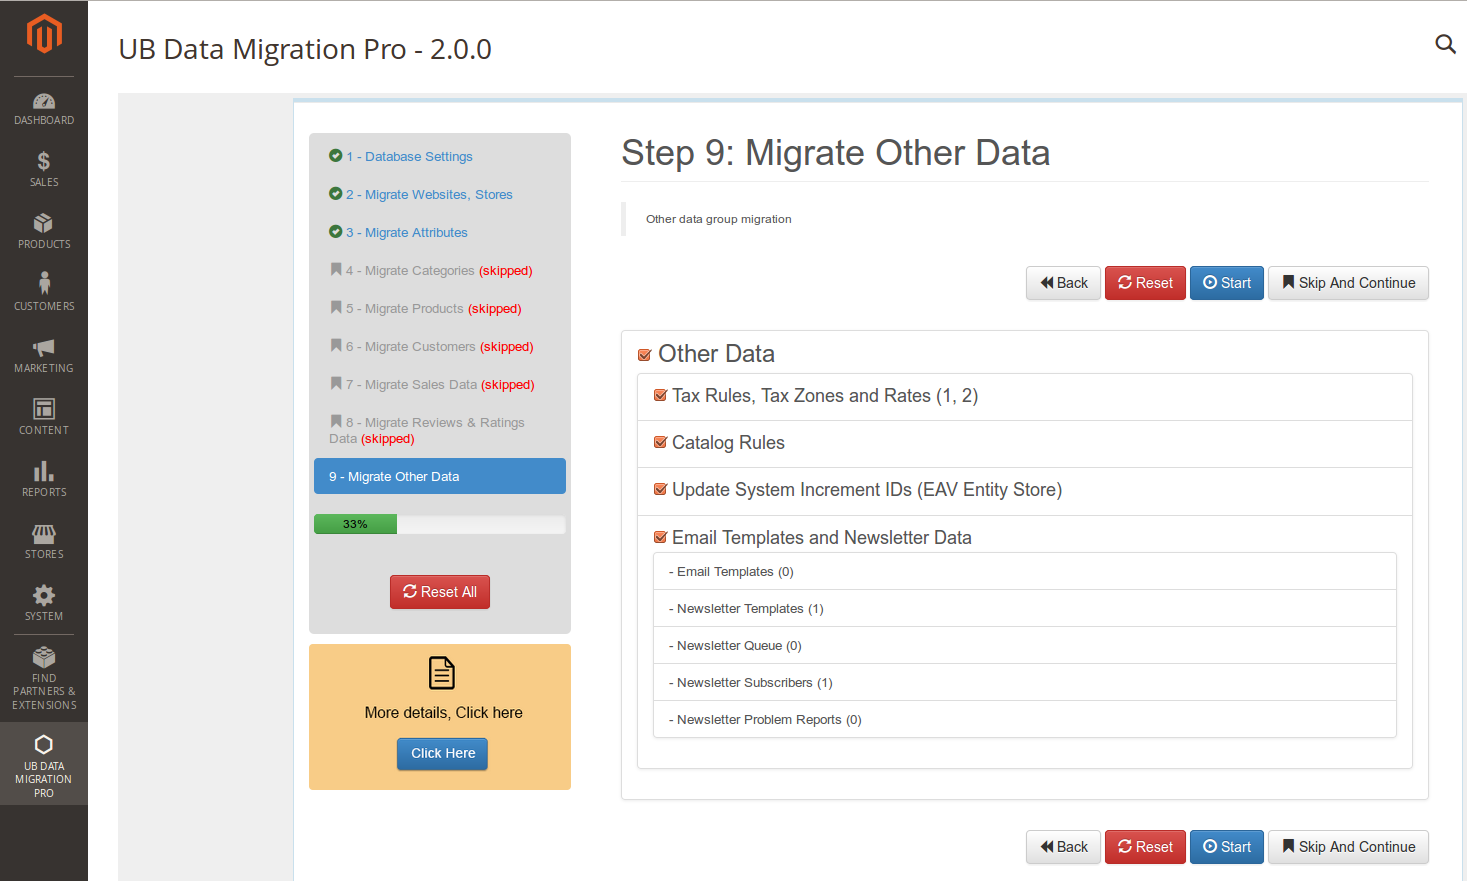 Step 9 - Migrate Other Data